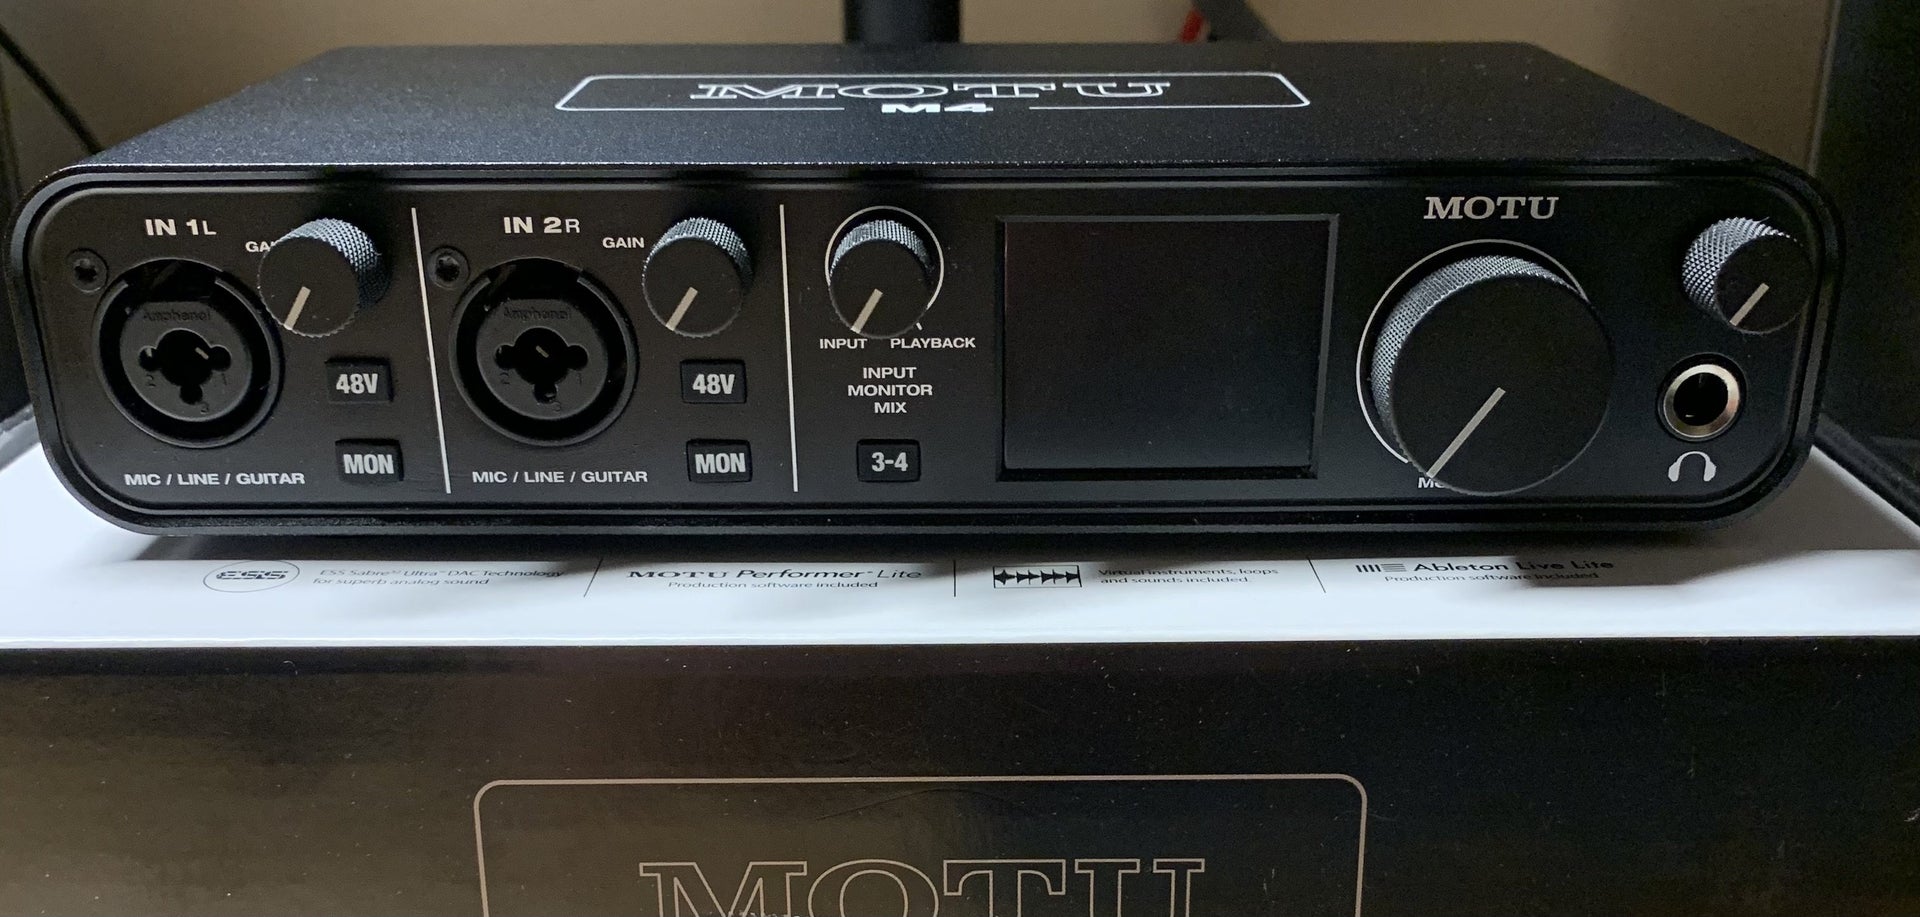 SOLD - MOTU M4 4x4 USB Audio Interface (shipping included